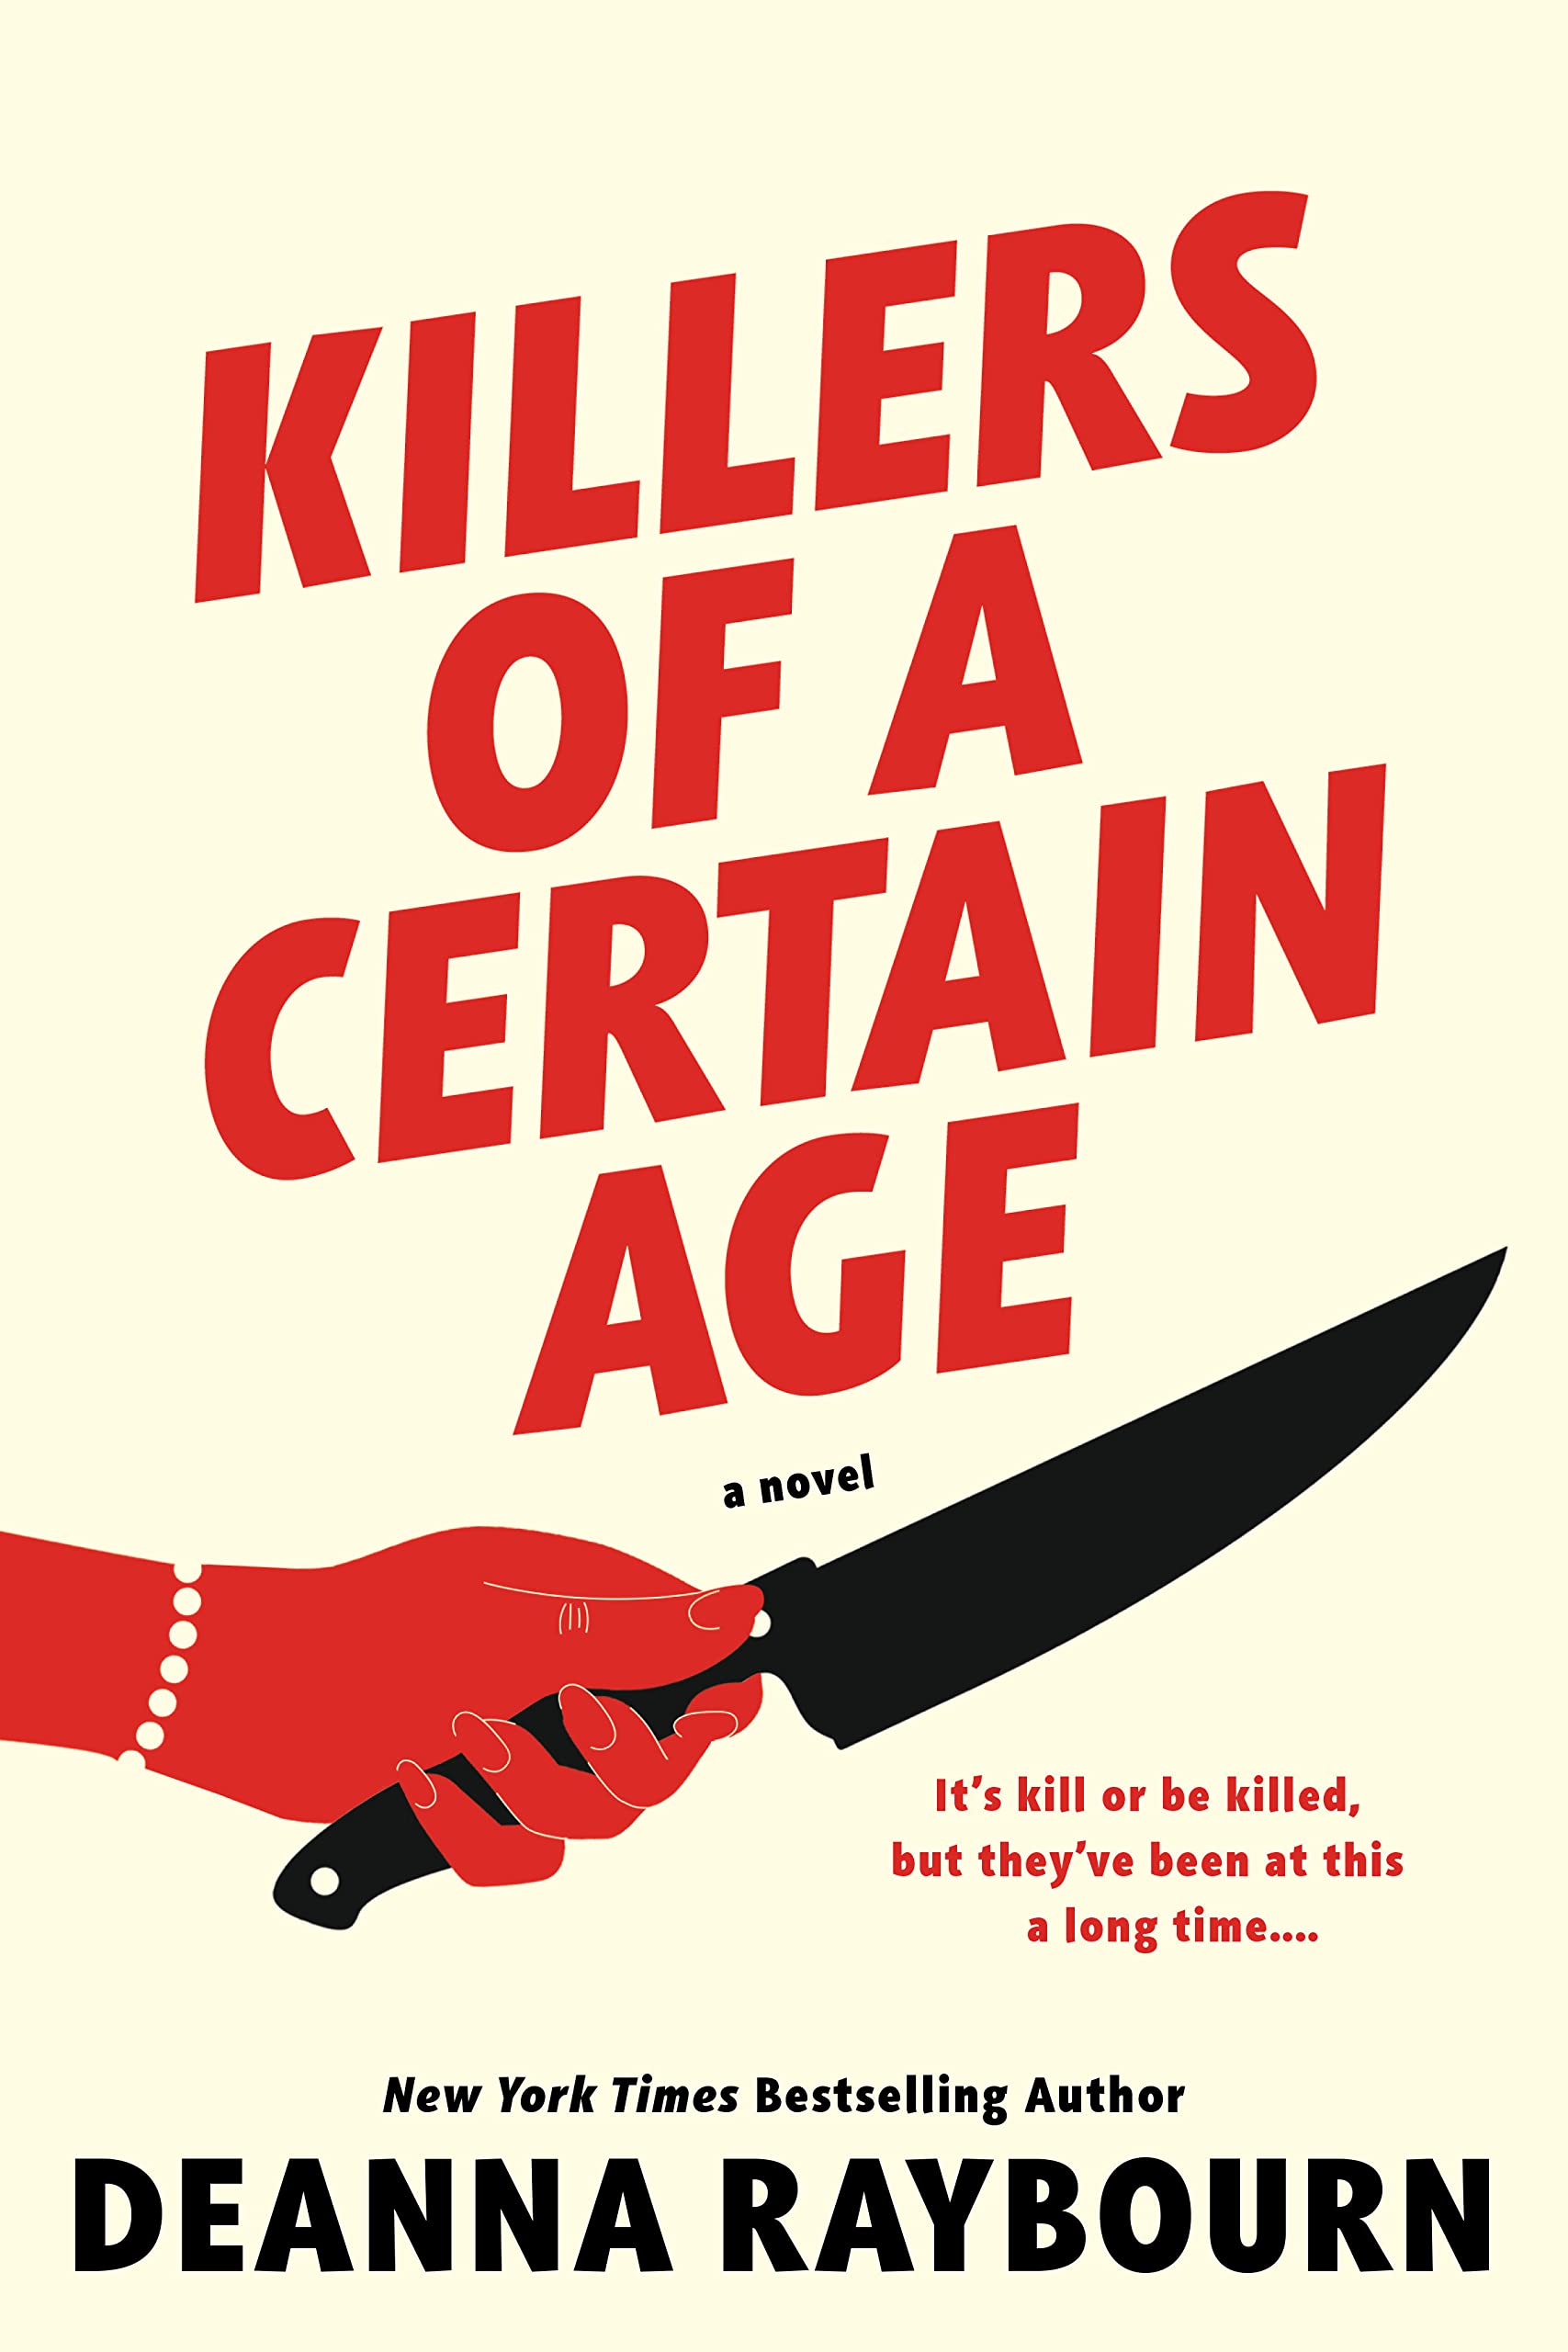 Book cover showing a hand holding a knife.